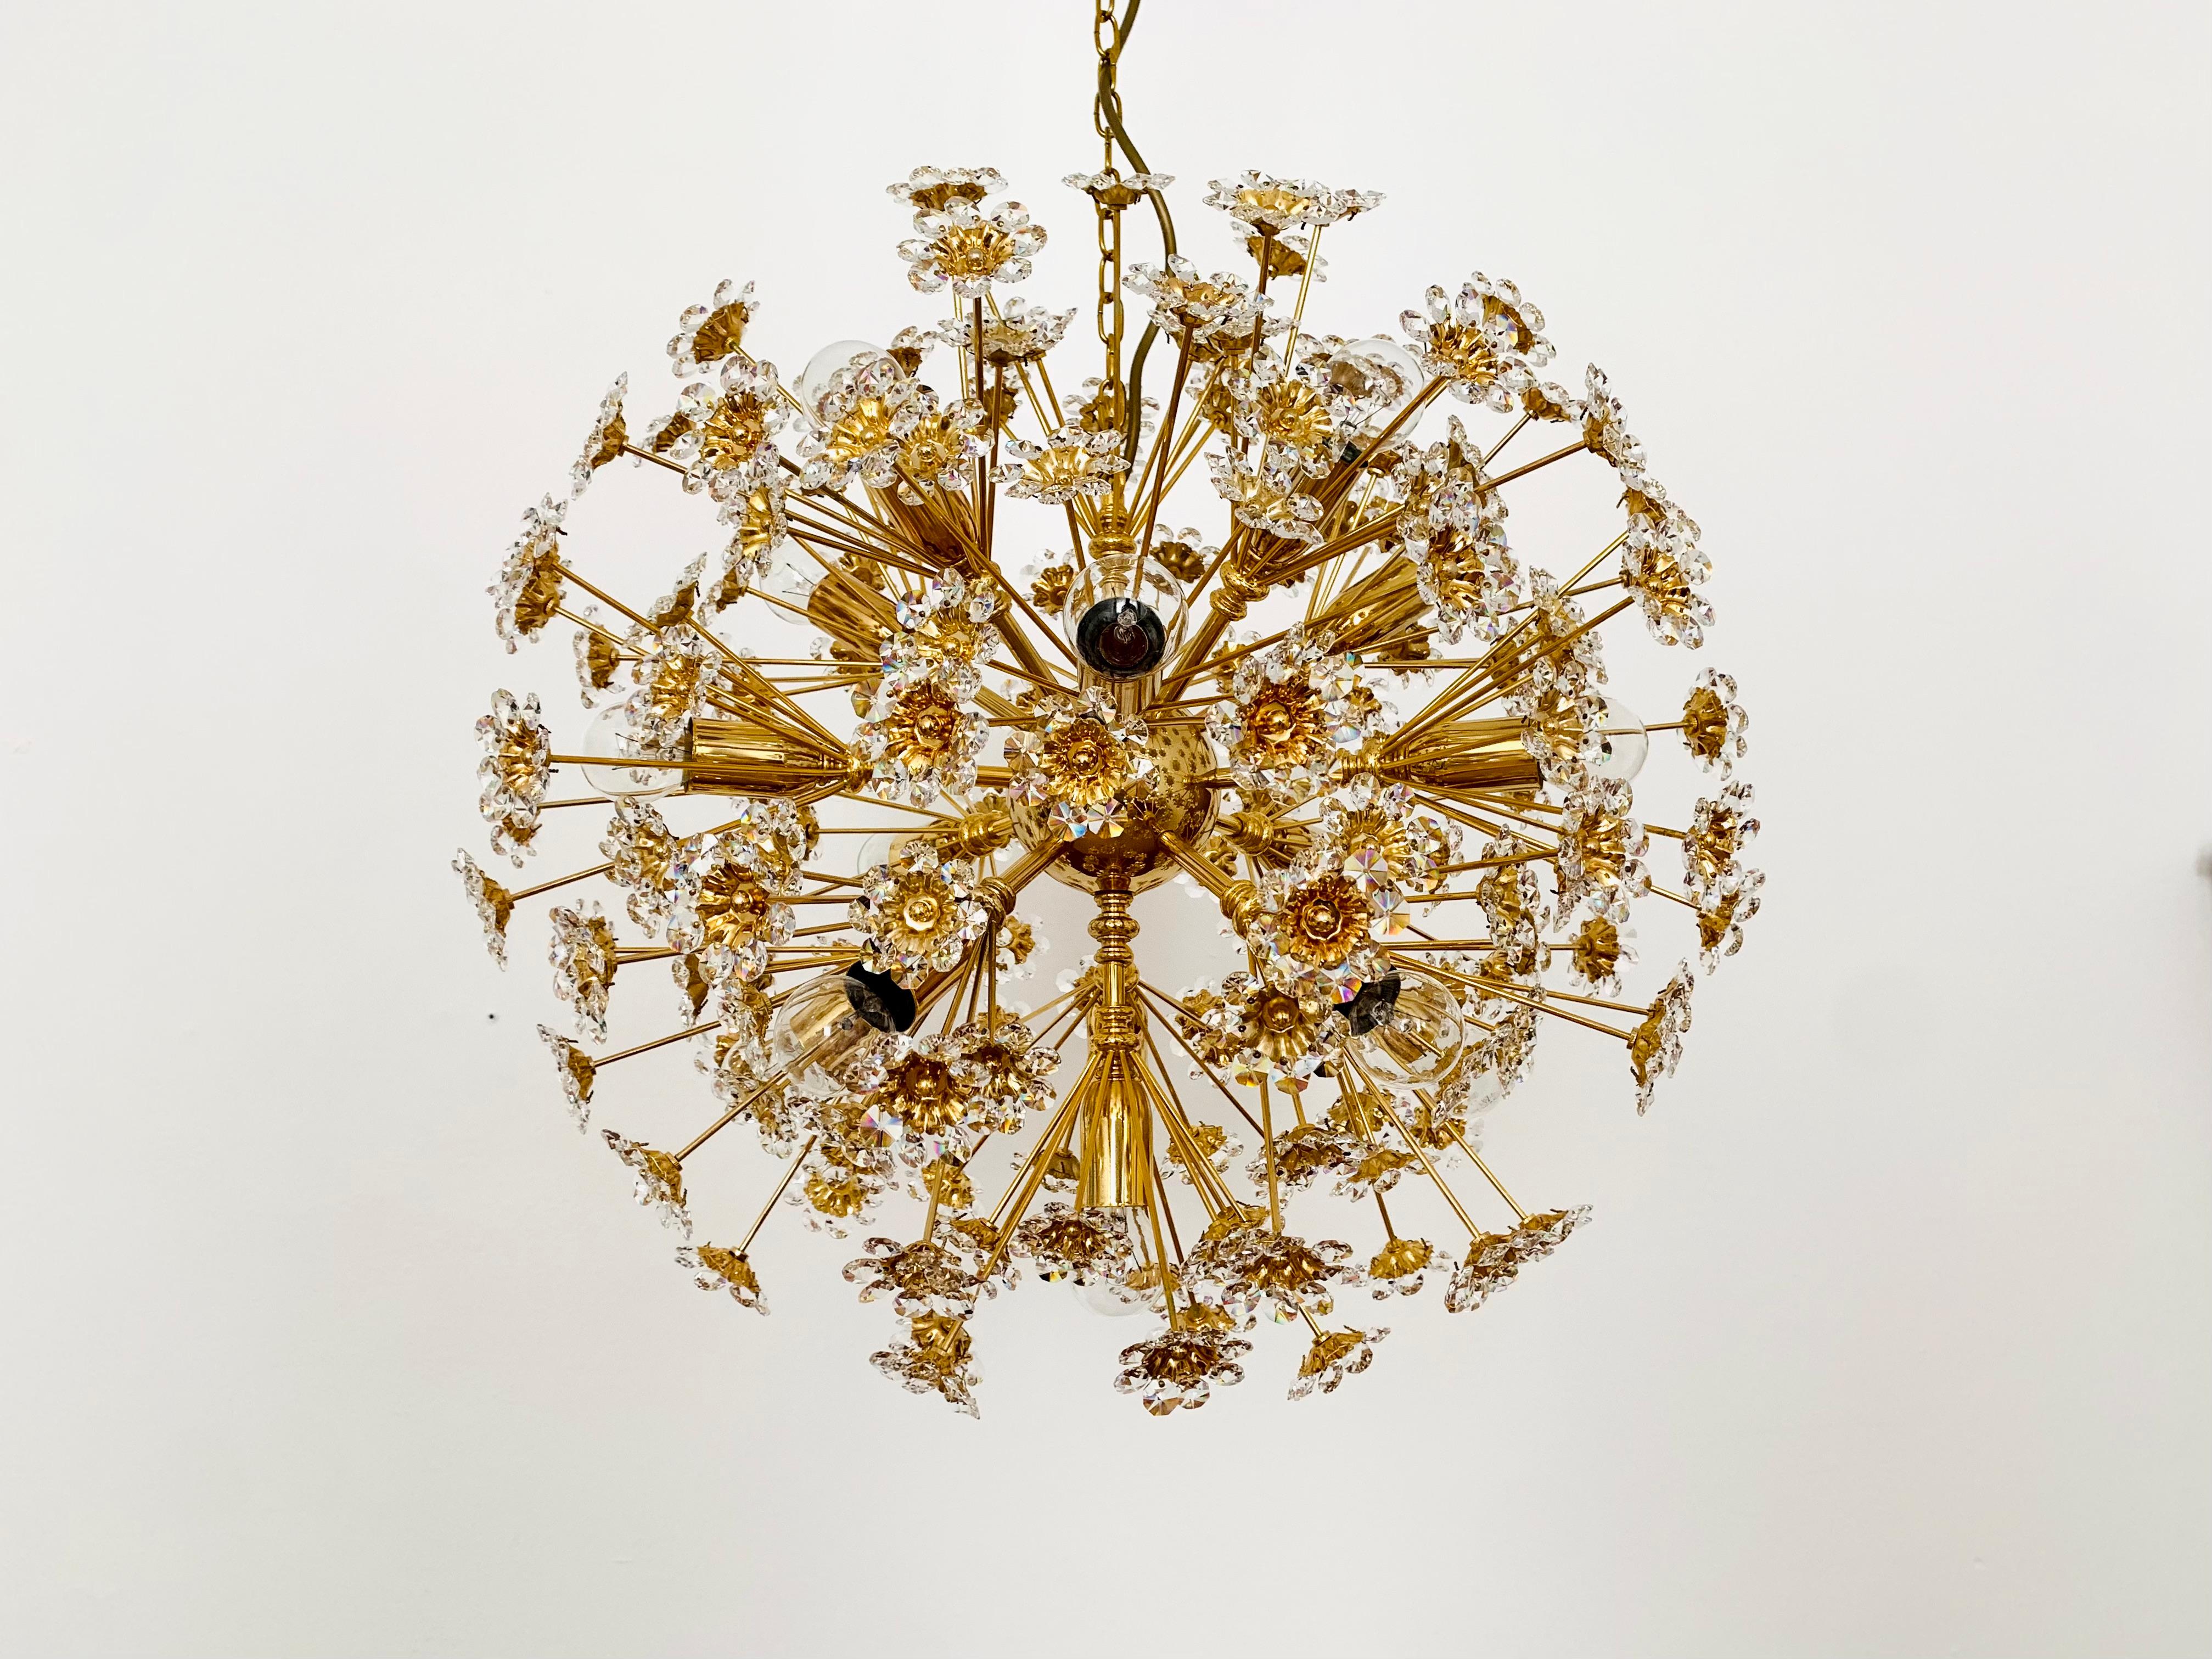 Impressive floral ball chandelier from the 1960s.
Extremely successful design and very high quality workmanship.
The 170 floral crystals spread a spectacular play of light in the room.
Very luxurious and an asset to any home.

Condition:

Very good